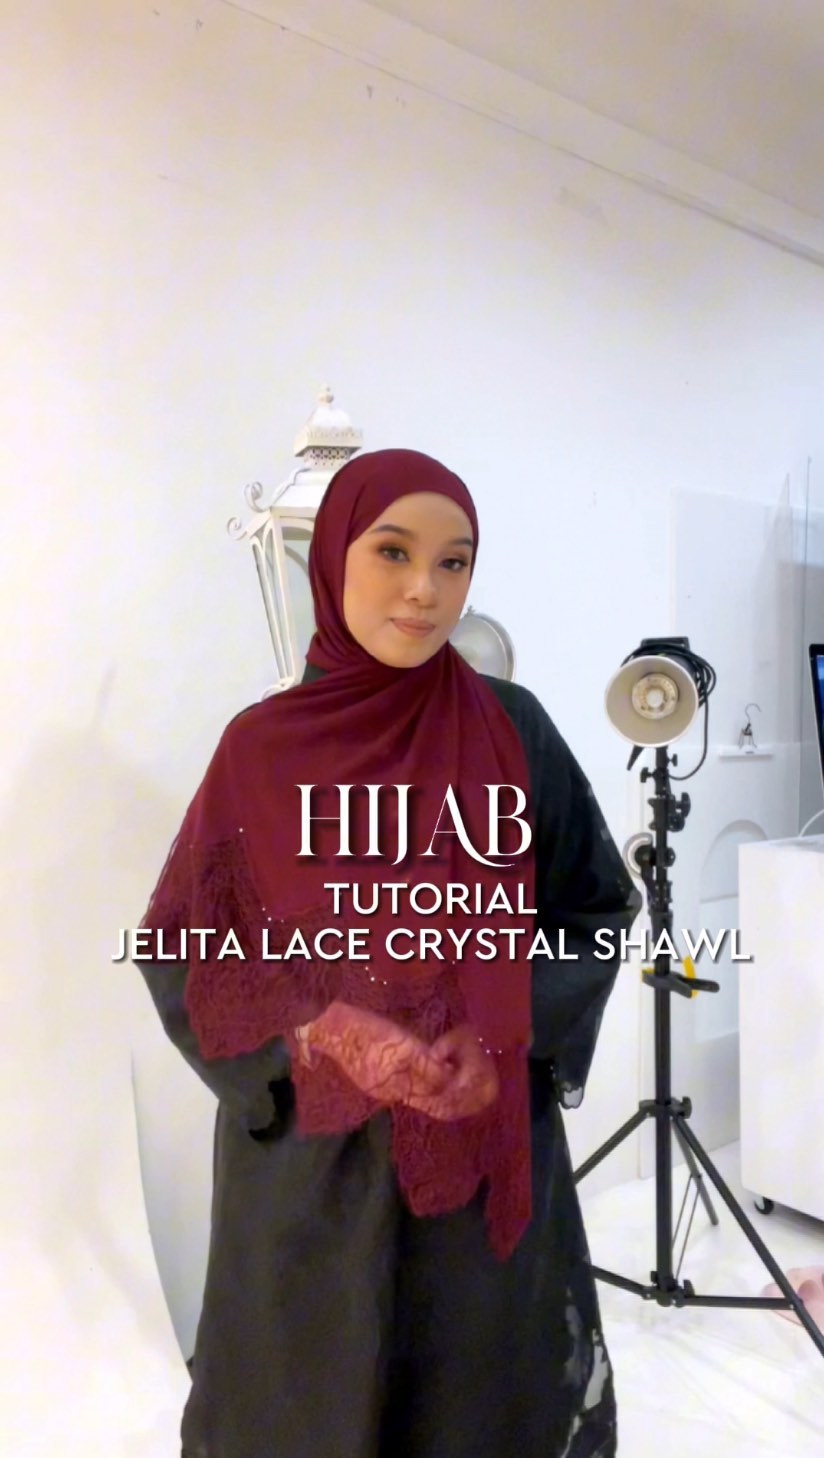 Who doesn’t loooveee Bella Zahir’s hijab look? It’s minimal, neat, and offers full coverage. Check out the two fabulous ways she styles the Jelita Lace Crystal Shawl for her Raya look this year. Love ke tidakk? Save this post or share it with your siblings for some matchy-matchy hijab vibes. #GenerasiNaelofar #RayaCollection #RayaHijab